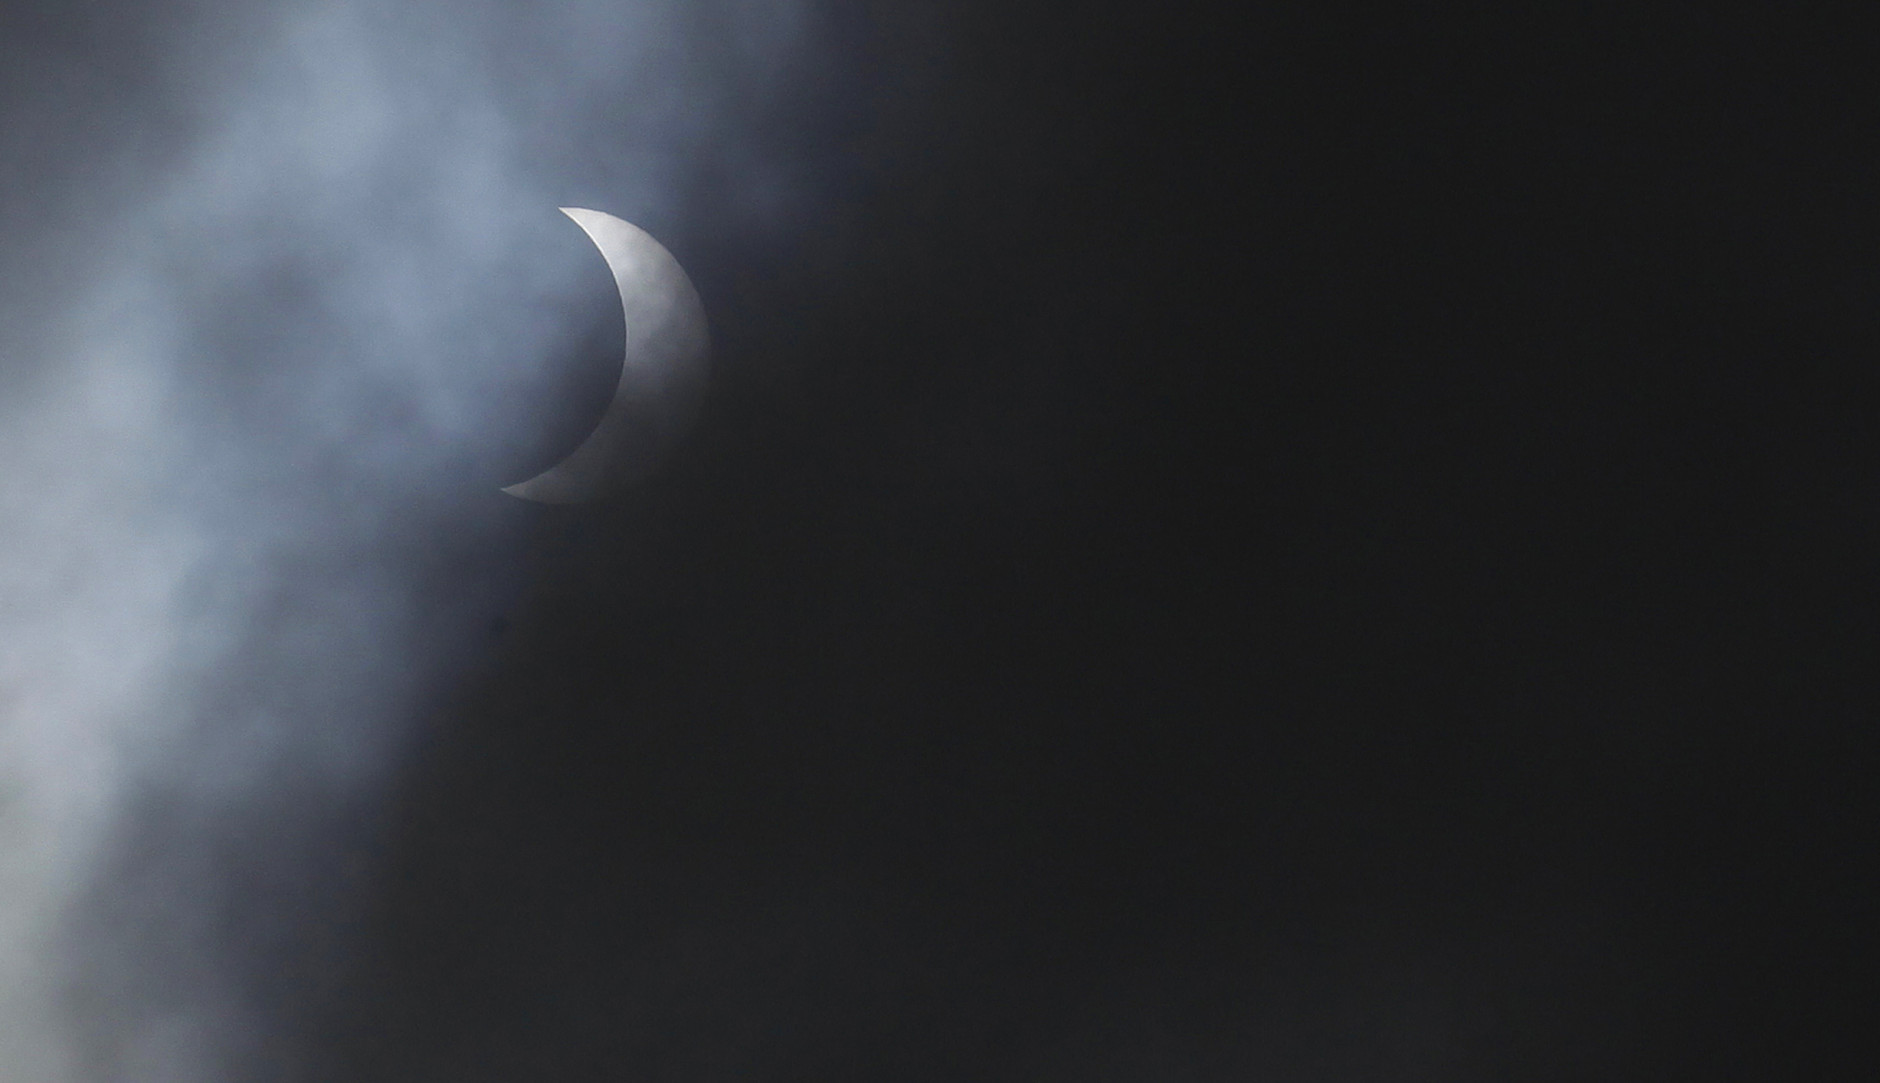 The solar eclipse is seen through the clouds at Queens University, Belfast, Northern Ireland, Friday, March 20, 2015.  People across Northern Ireland were treated to a rare glimpse of an almost total solar eclipse early Friday.   (AP Photo/Peter Morrison)